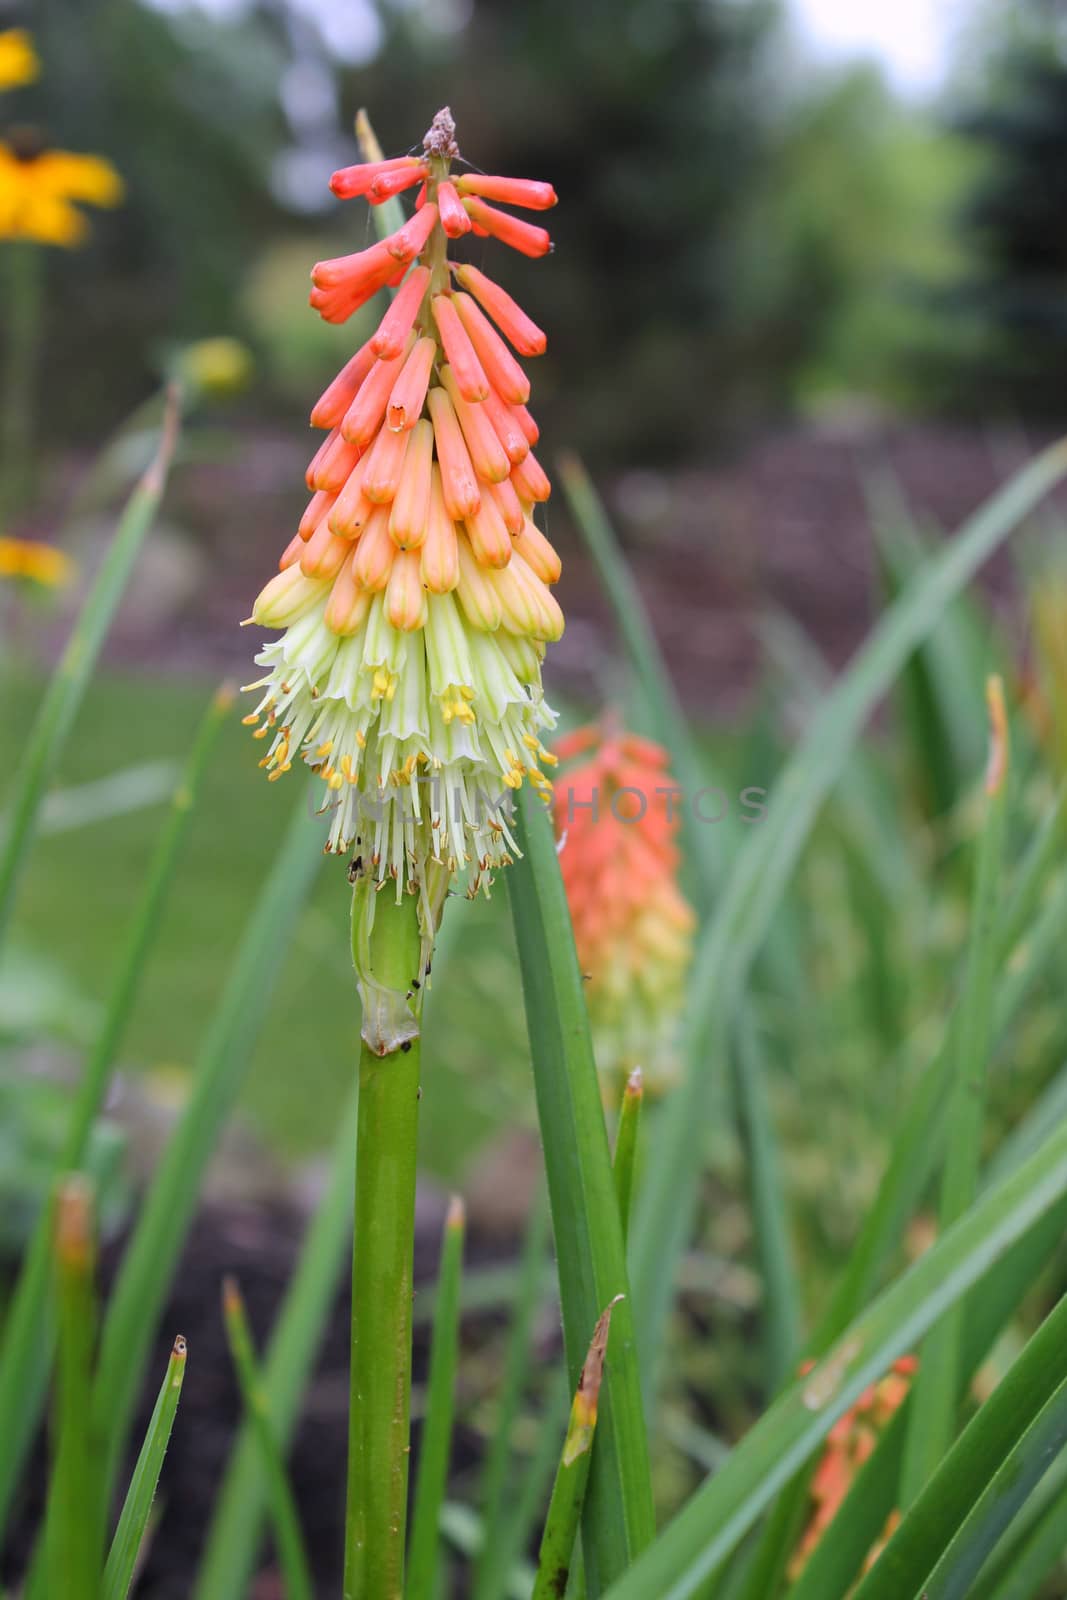 In spring and summer the Torch Lily plant sends up 3 to 5 feet spikes of brilliantly colored flowers that are a focal point in any garden.